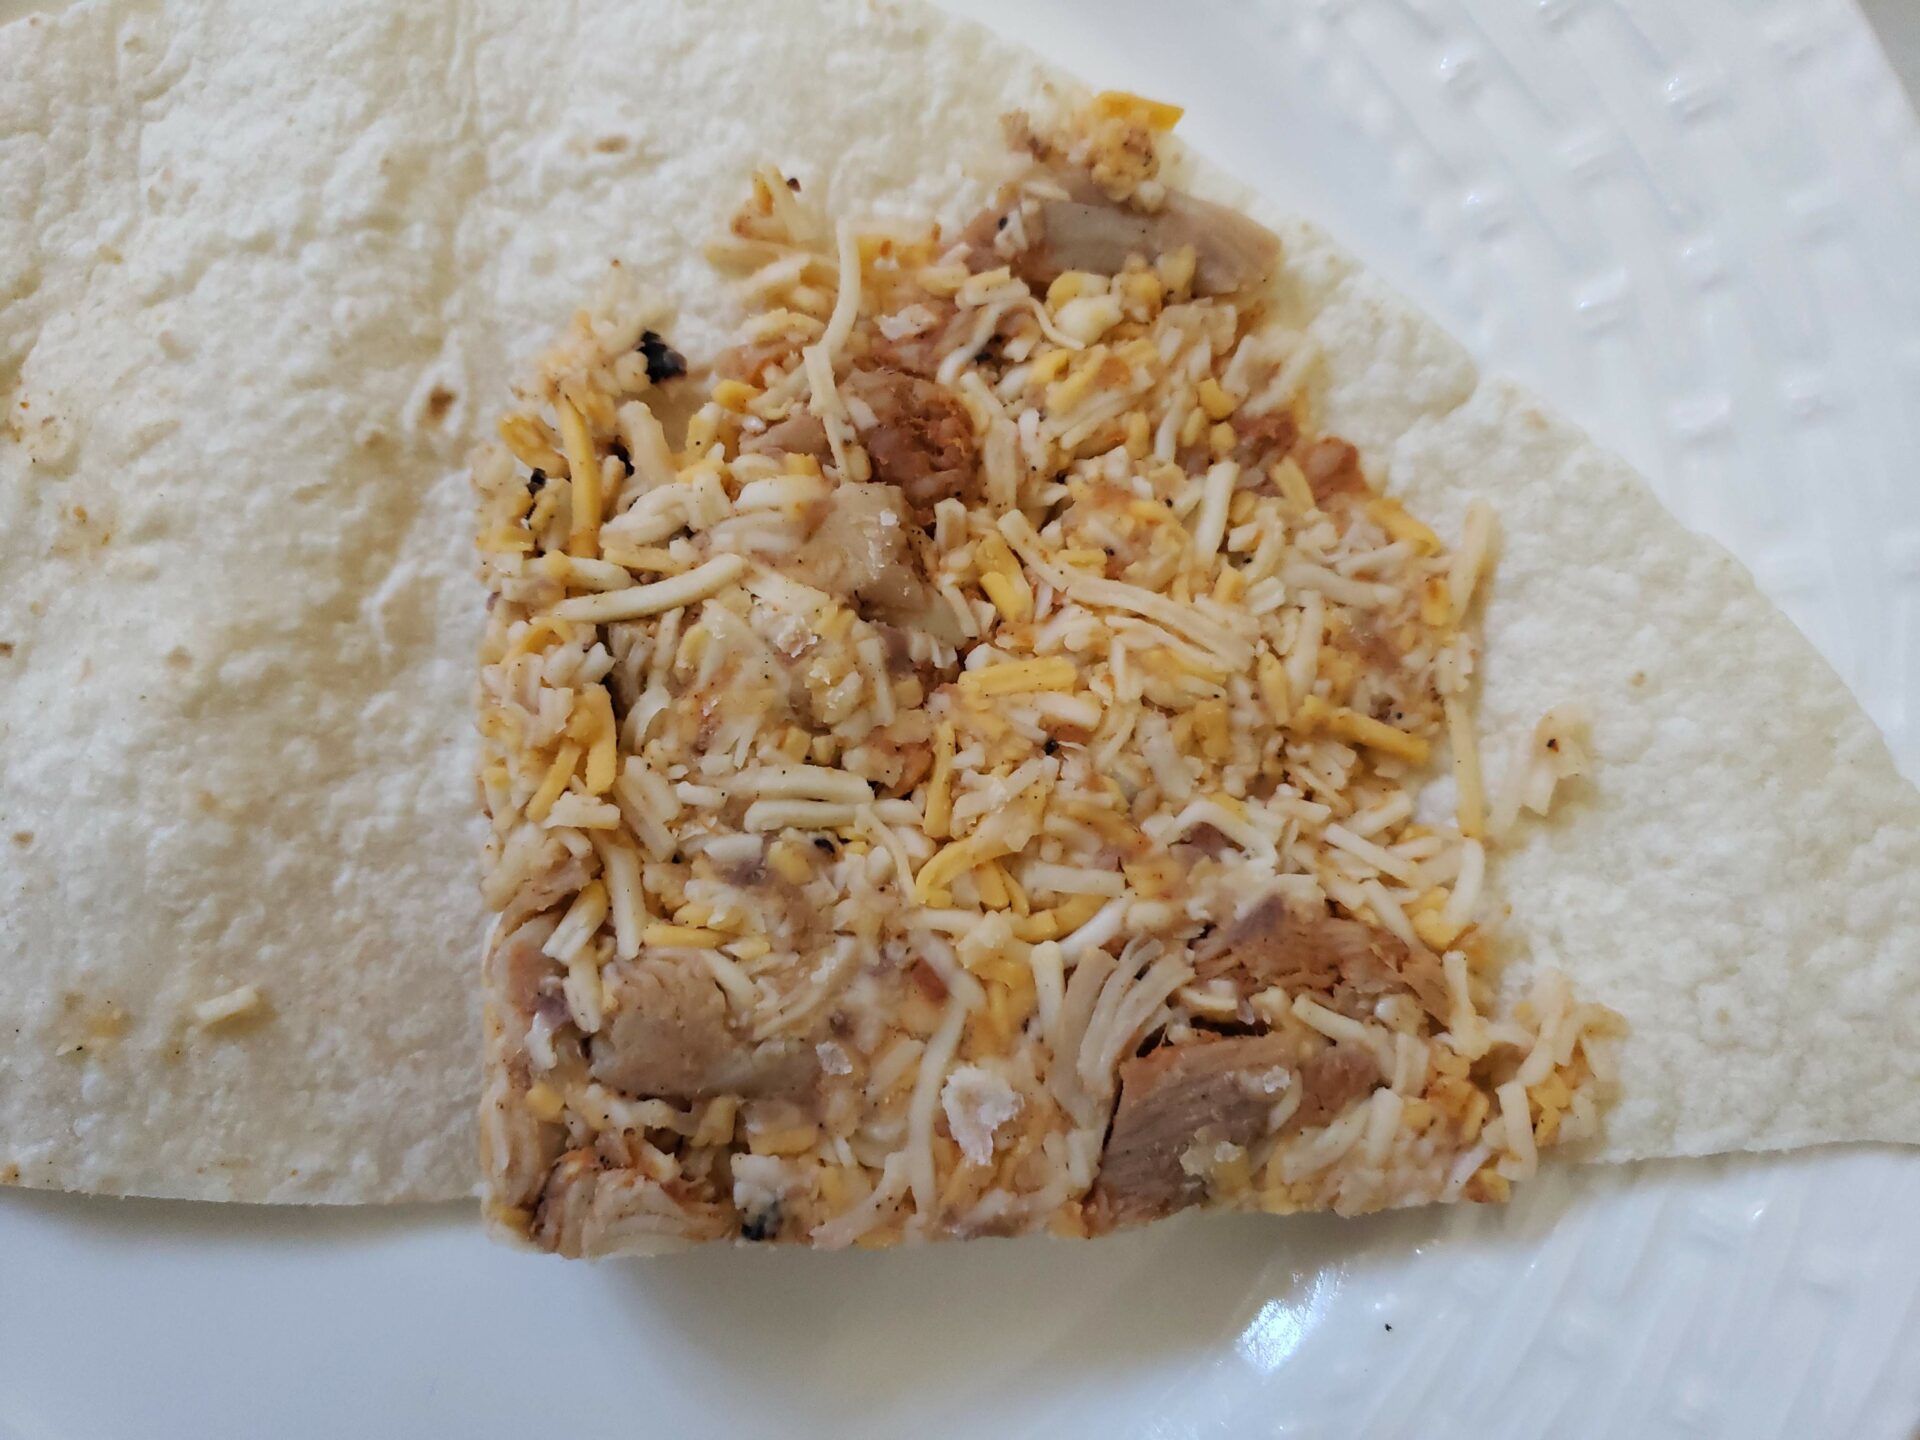 Uncooked-Quesadilla-Filling-from-Costco